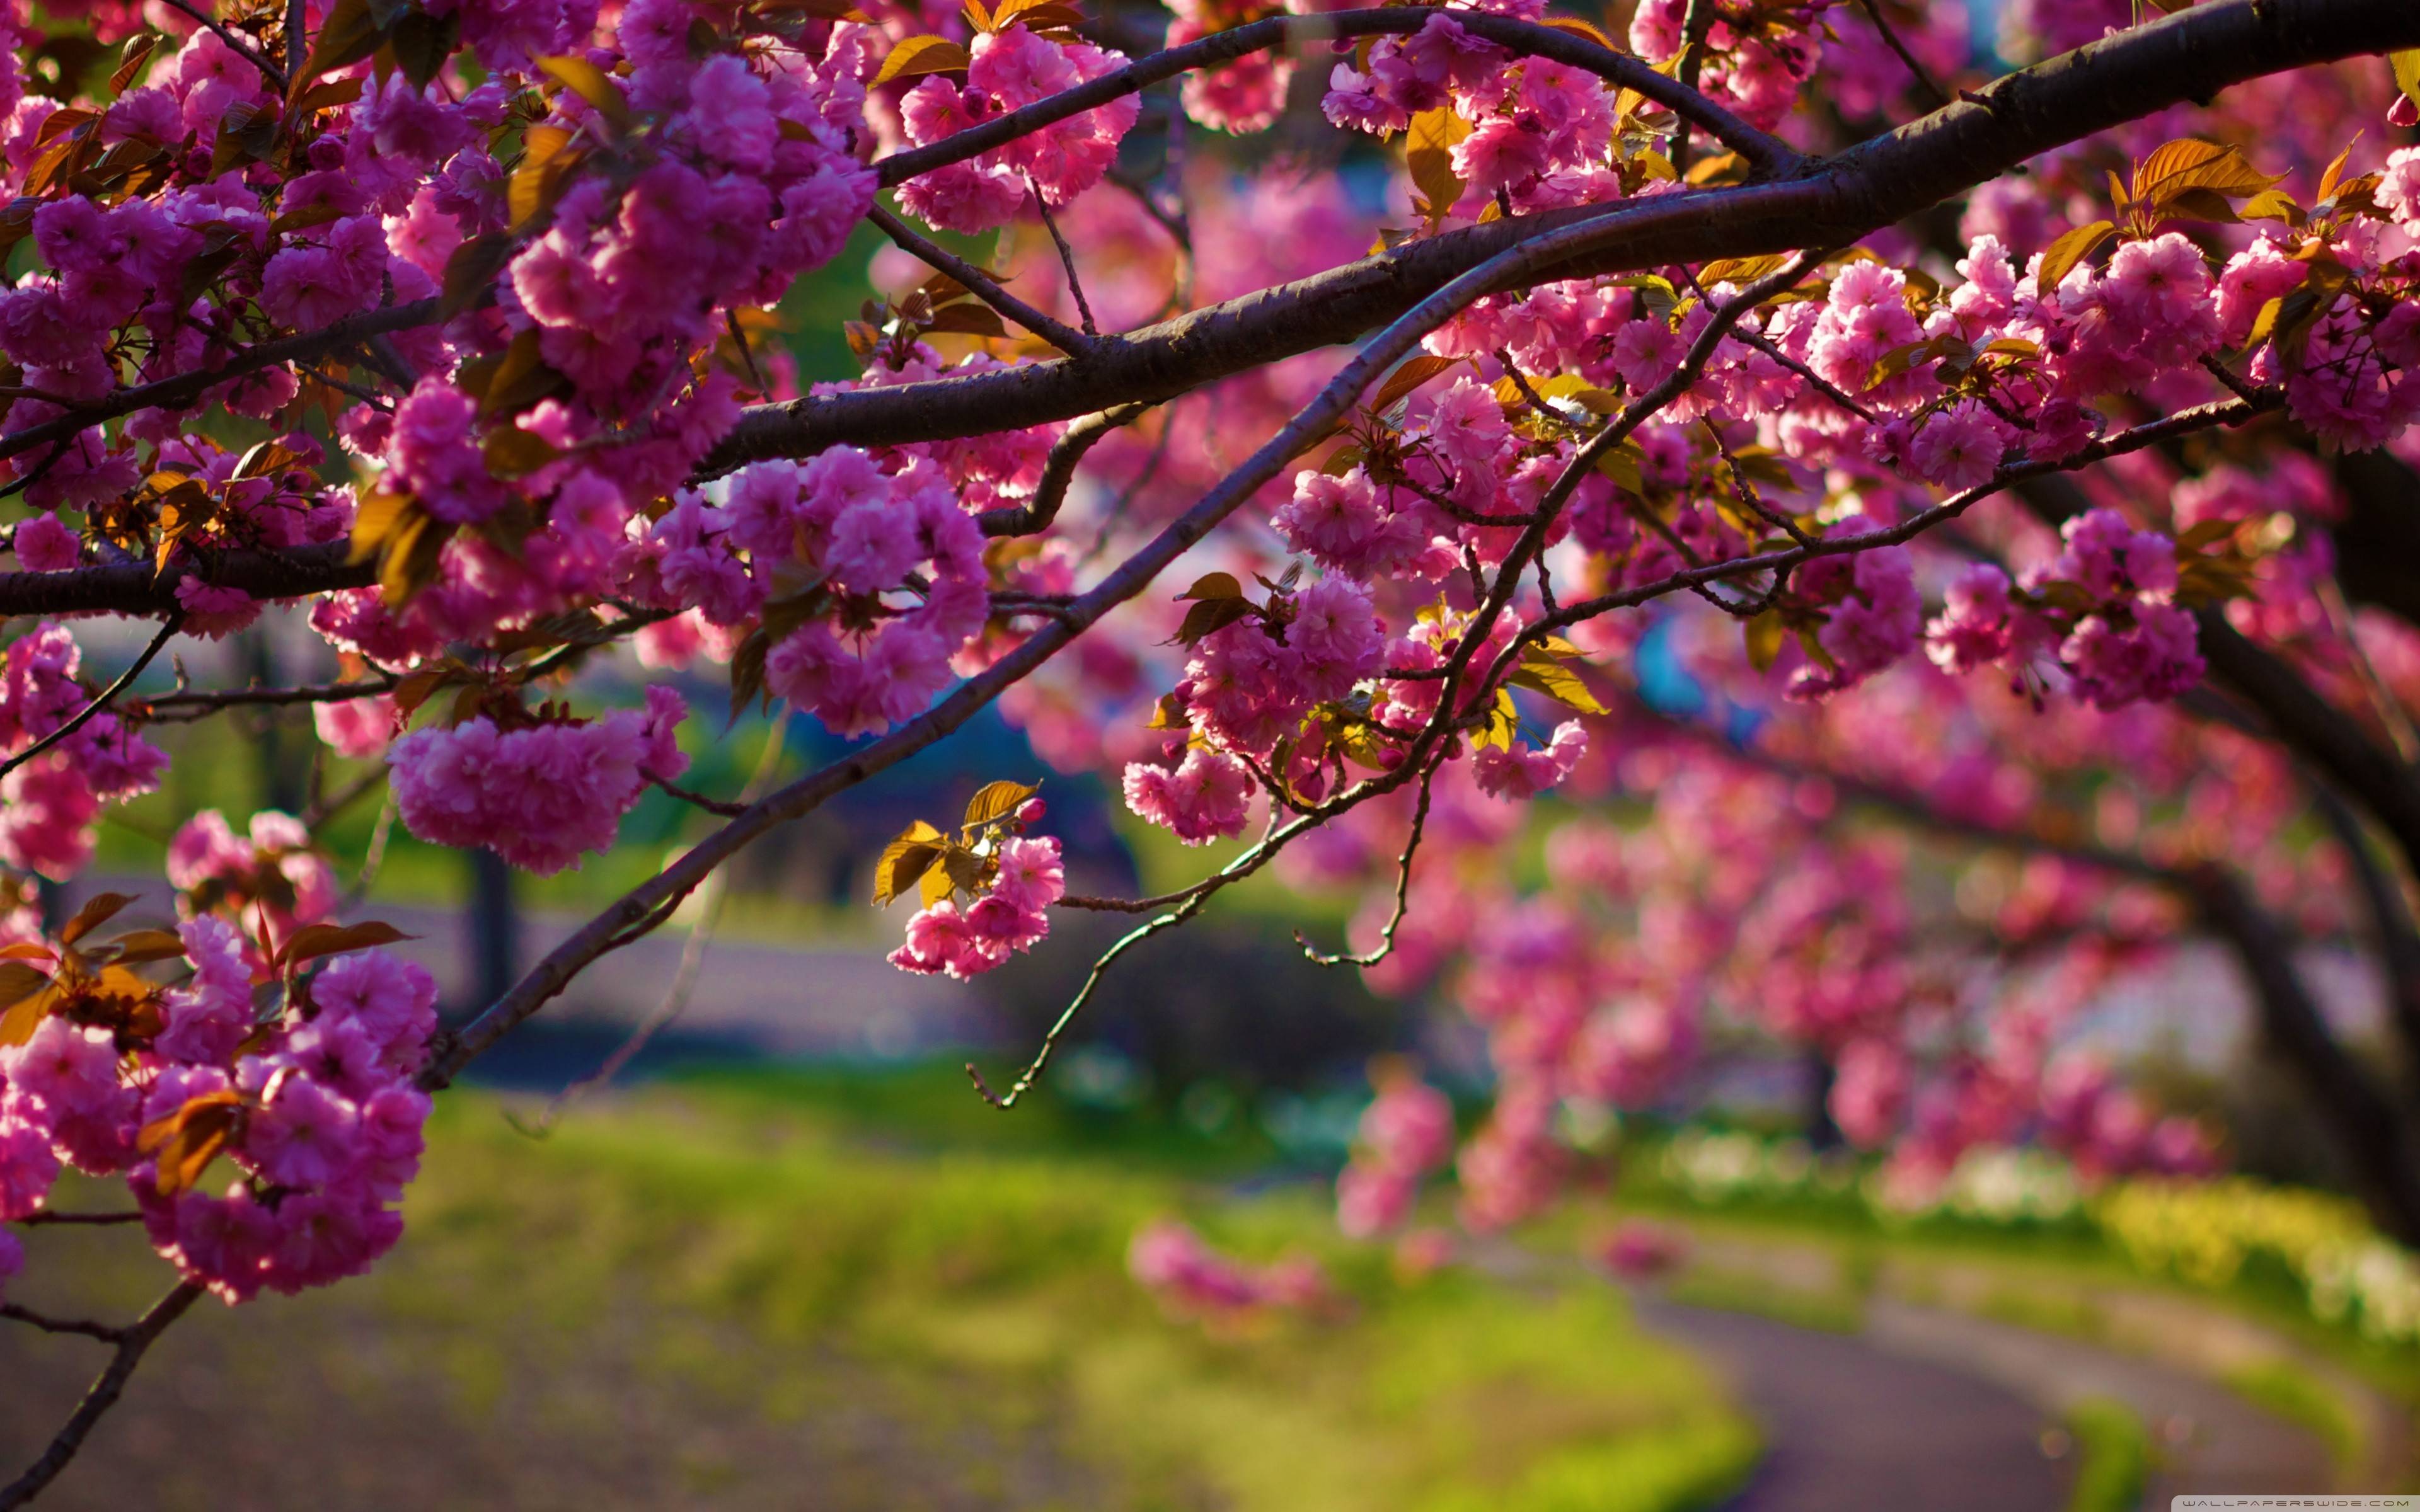 Spring wallpaper free Resolution 3840x2400 | Best Download this awesome wallpaper - Cool Wallpaper HD - CoolWallpaper-HD.com